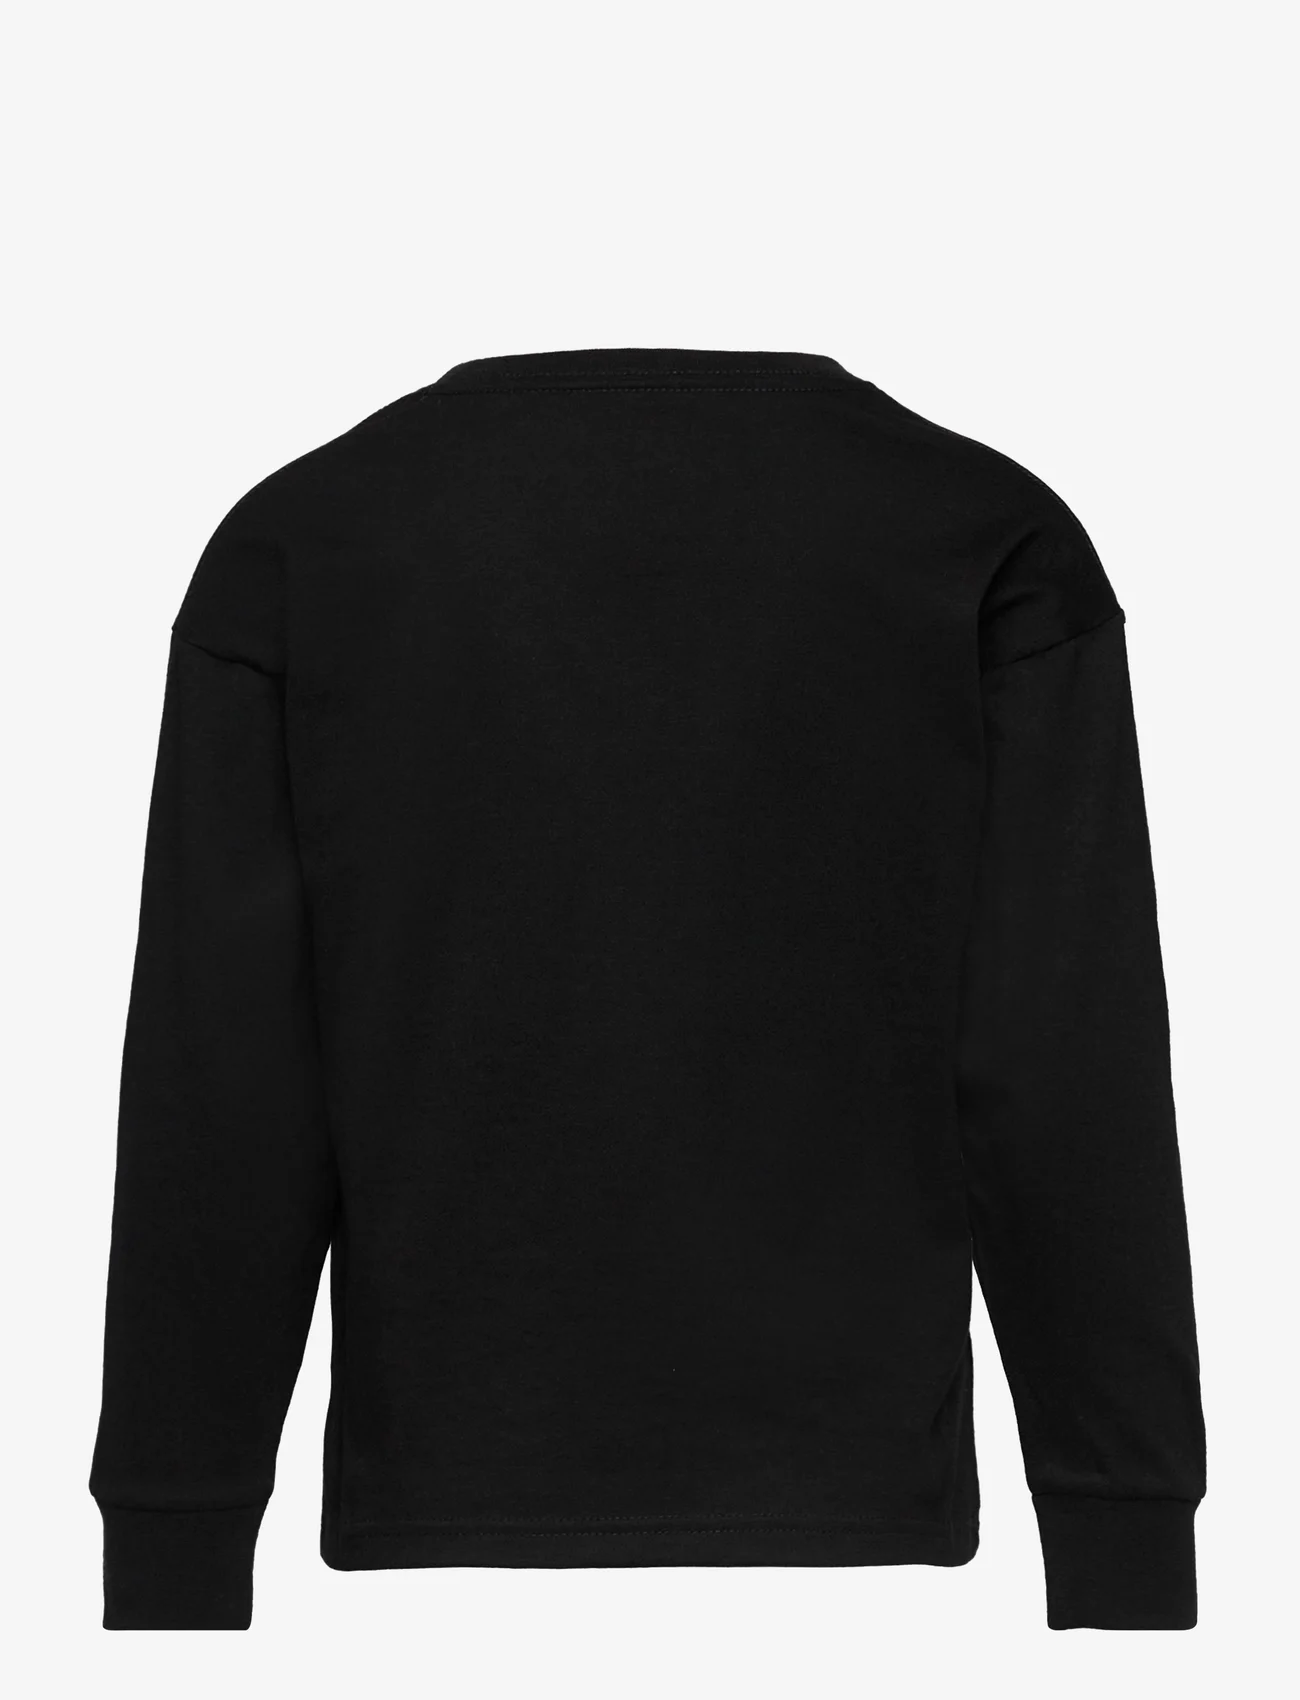 Nike - NSW RELAXED LS LBR TEE - long-sleeved t-shirts - black - 1